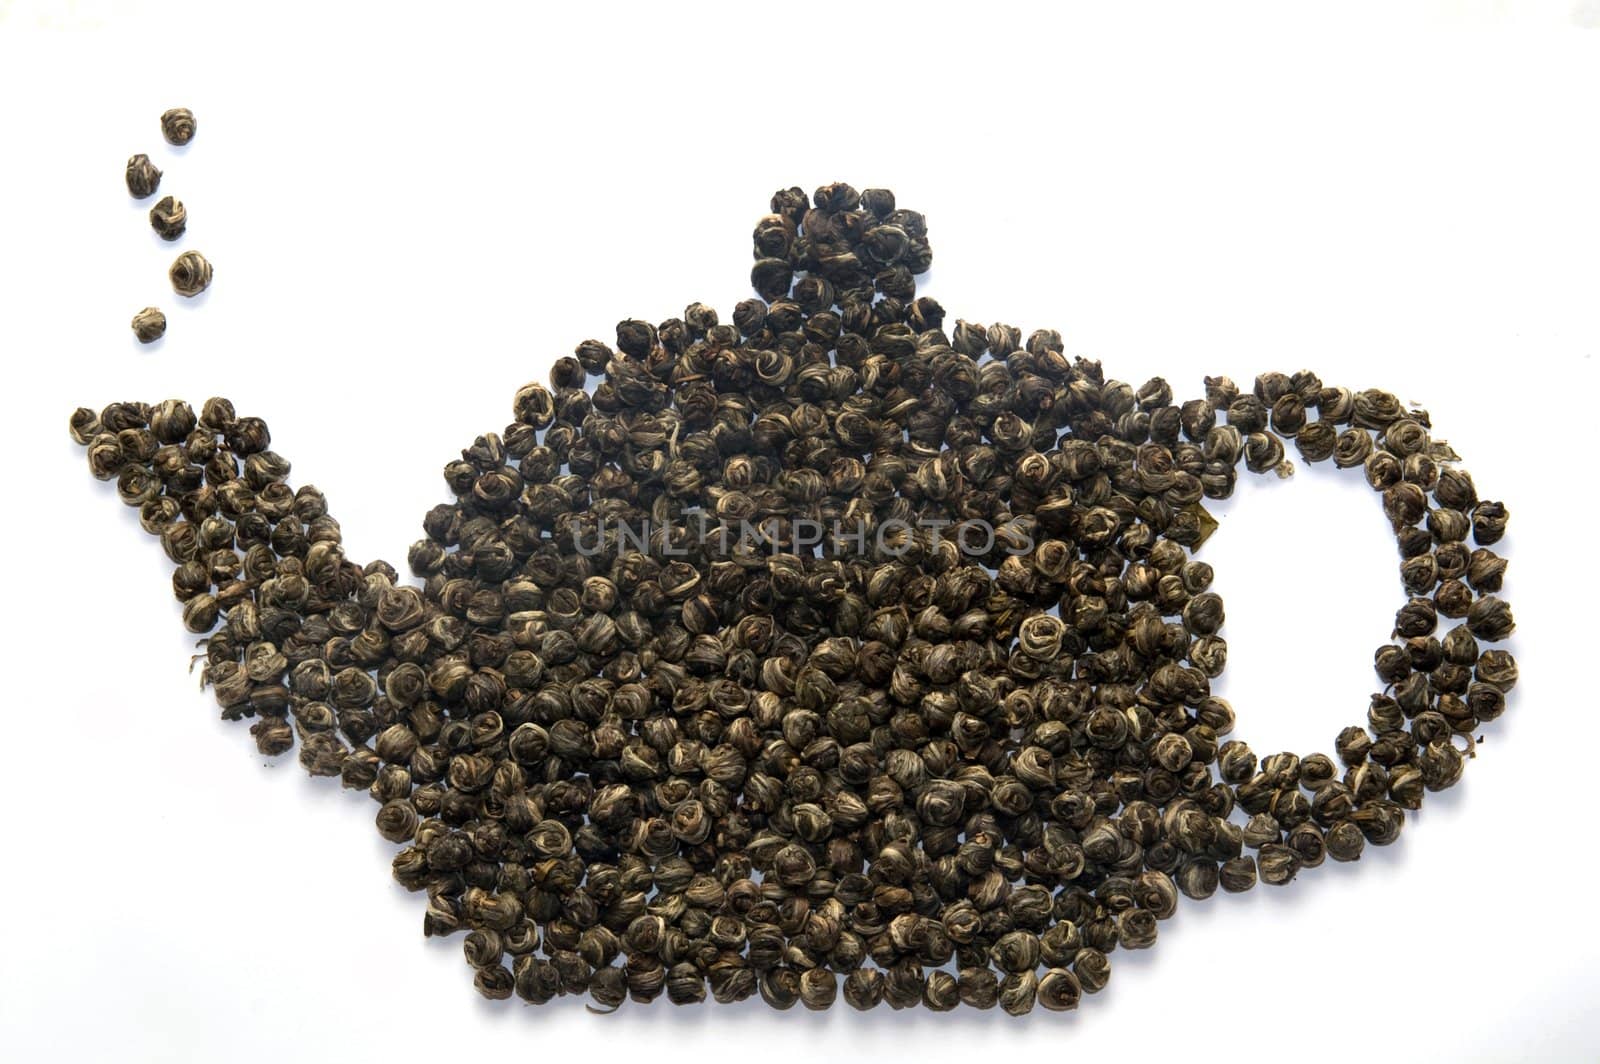 Teapot made of tea leaves by lilsla